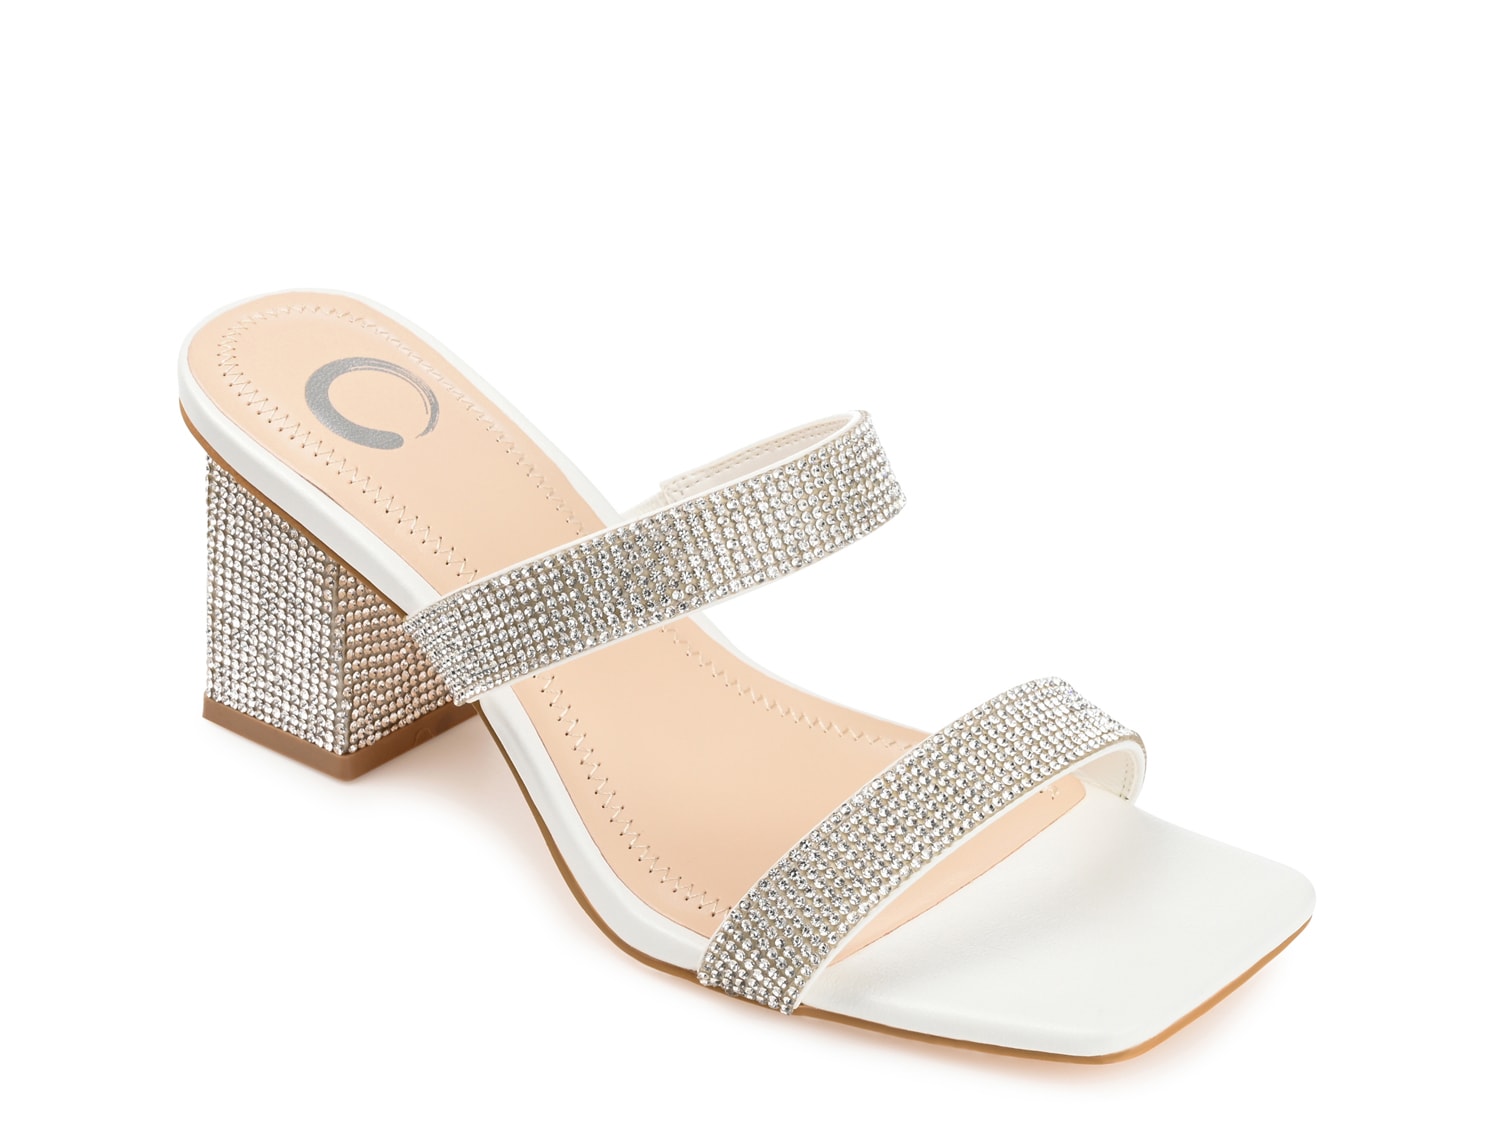 Journee Collection Shandee Sandal - Free Shipping | DSW